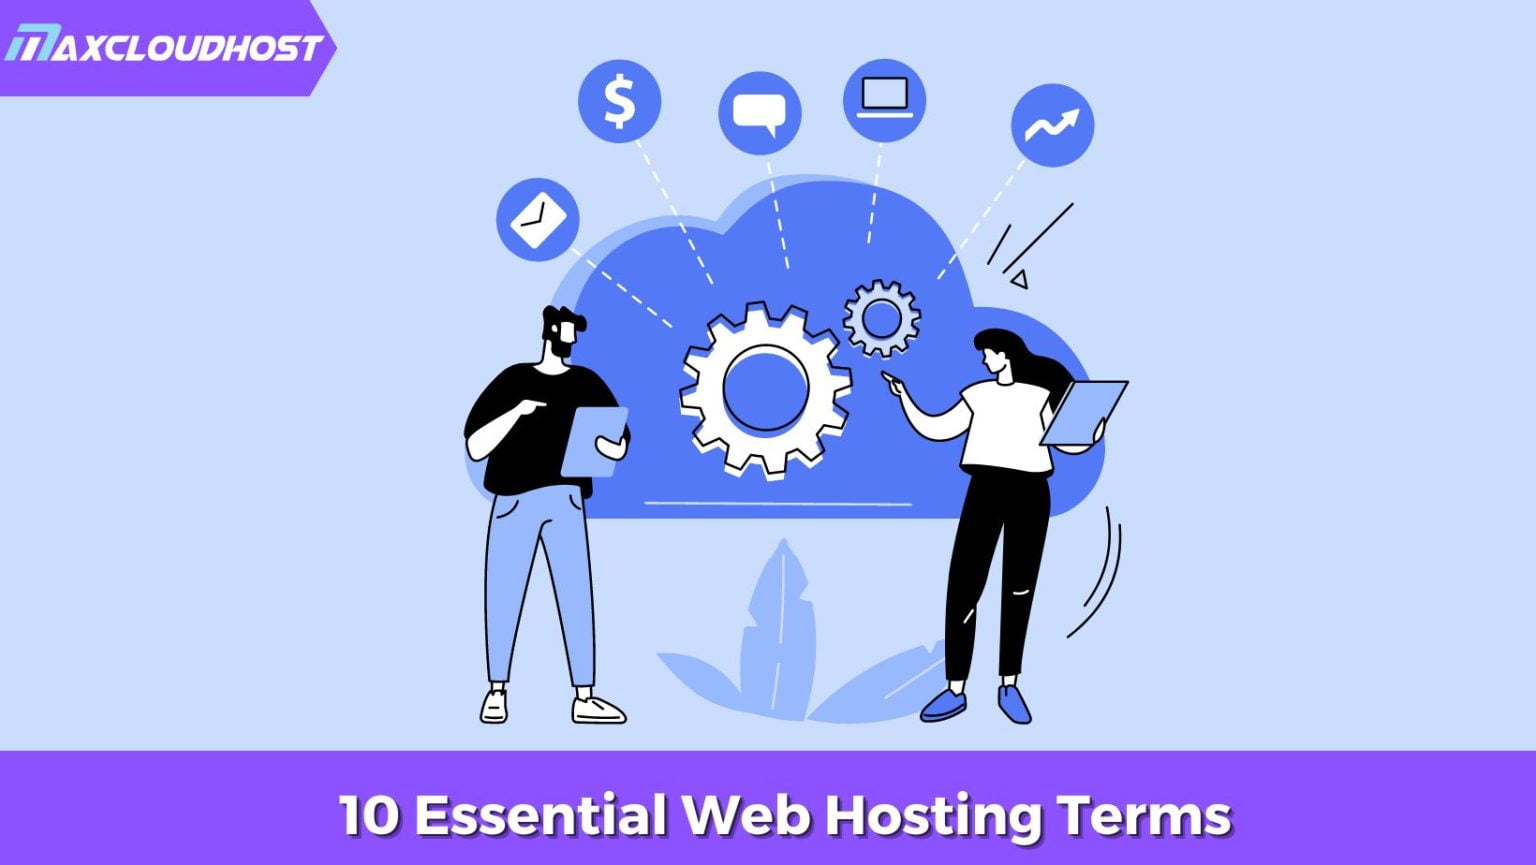 10 Essential Web Hosting Terms You Need To Know